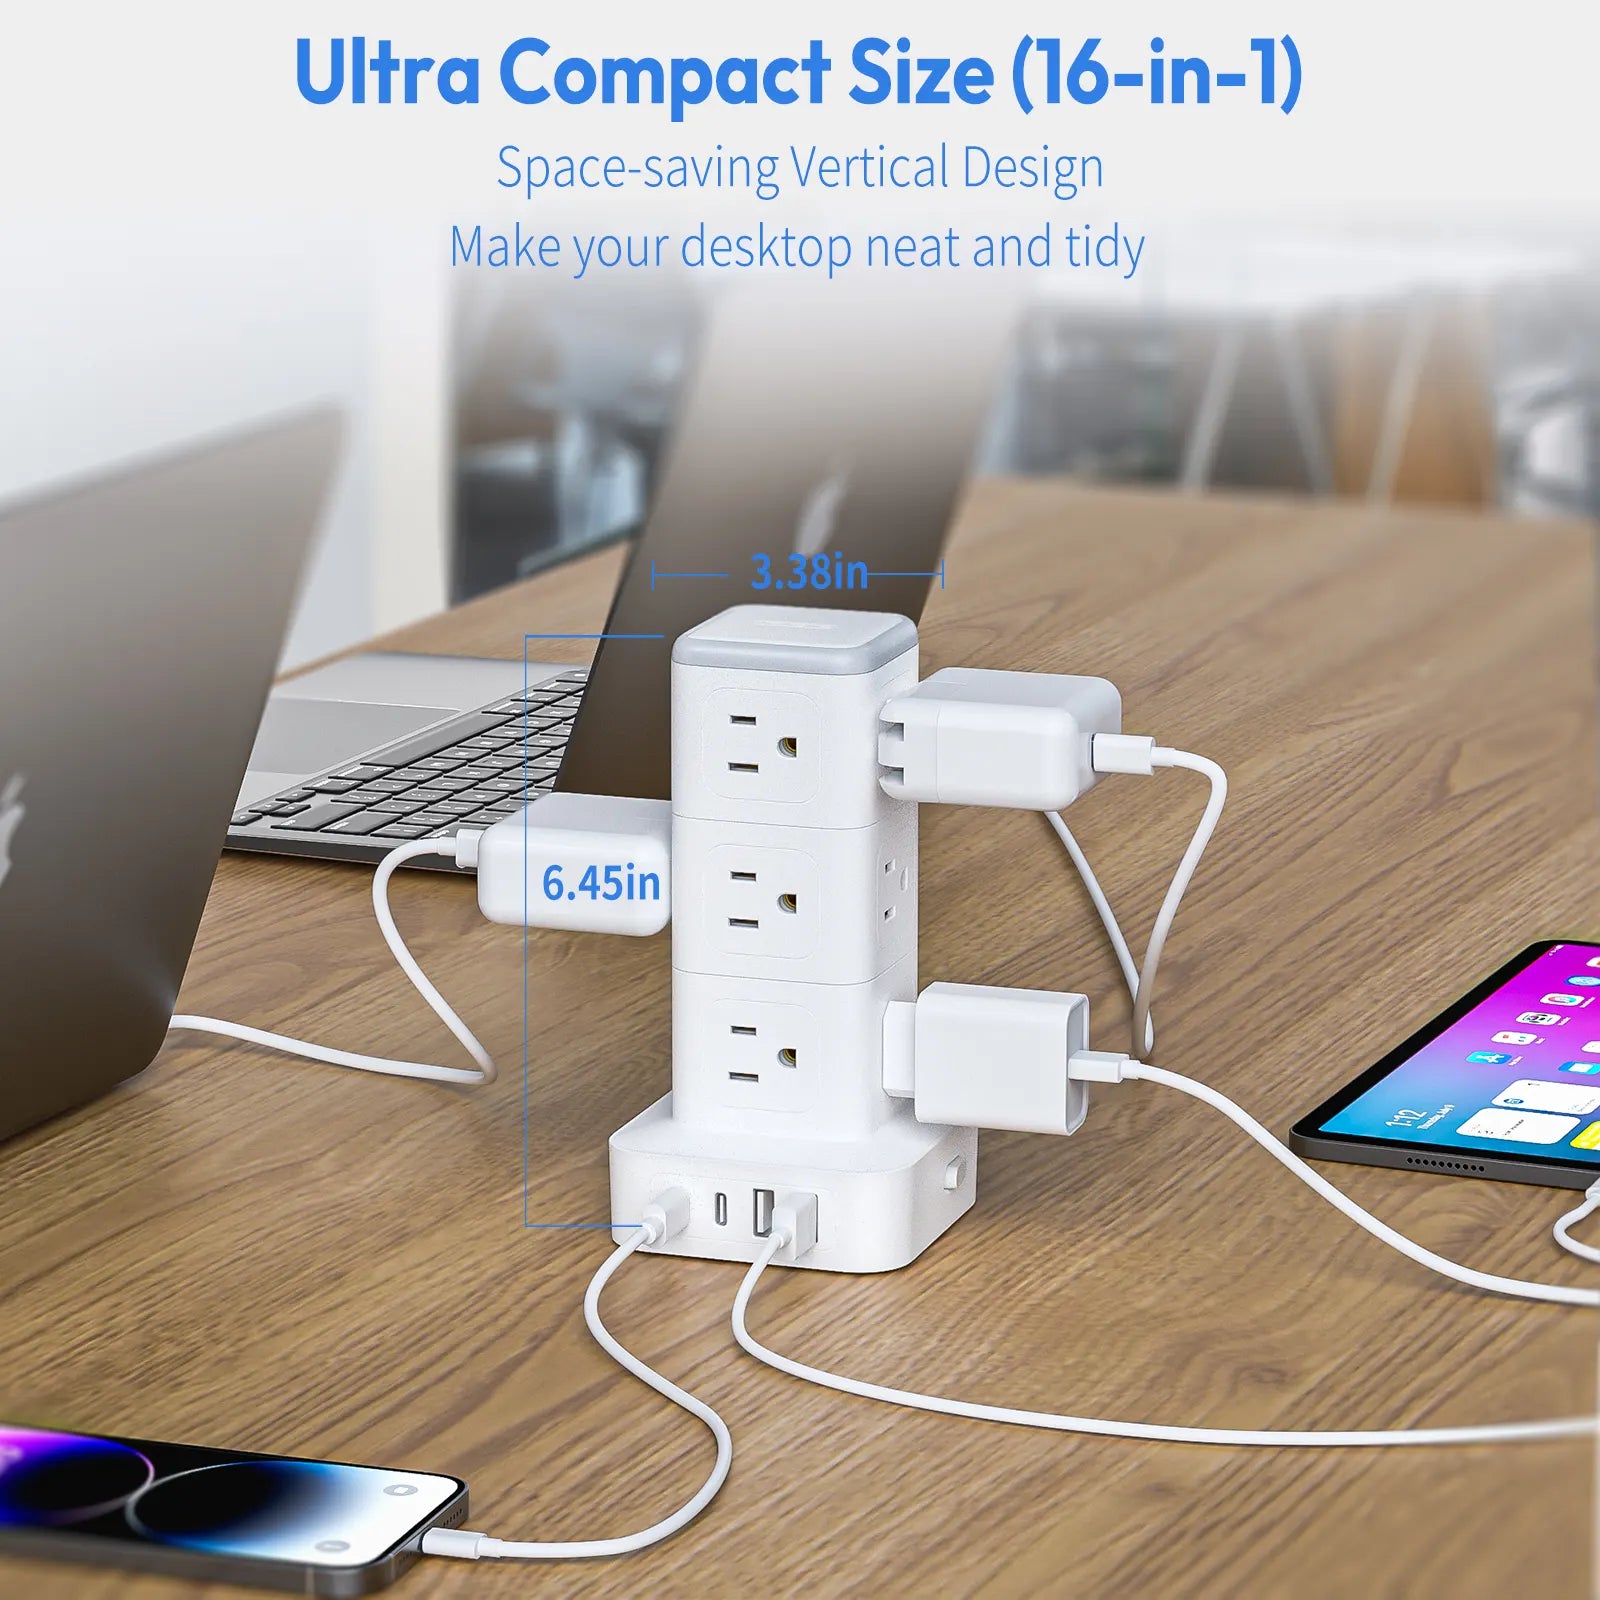 Ntonpower New Surge Protector Power Strip Tower 12 Outlets 2 USB-A 2 USB-C